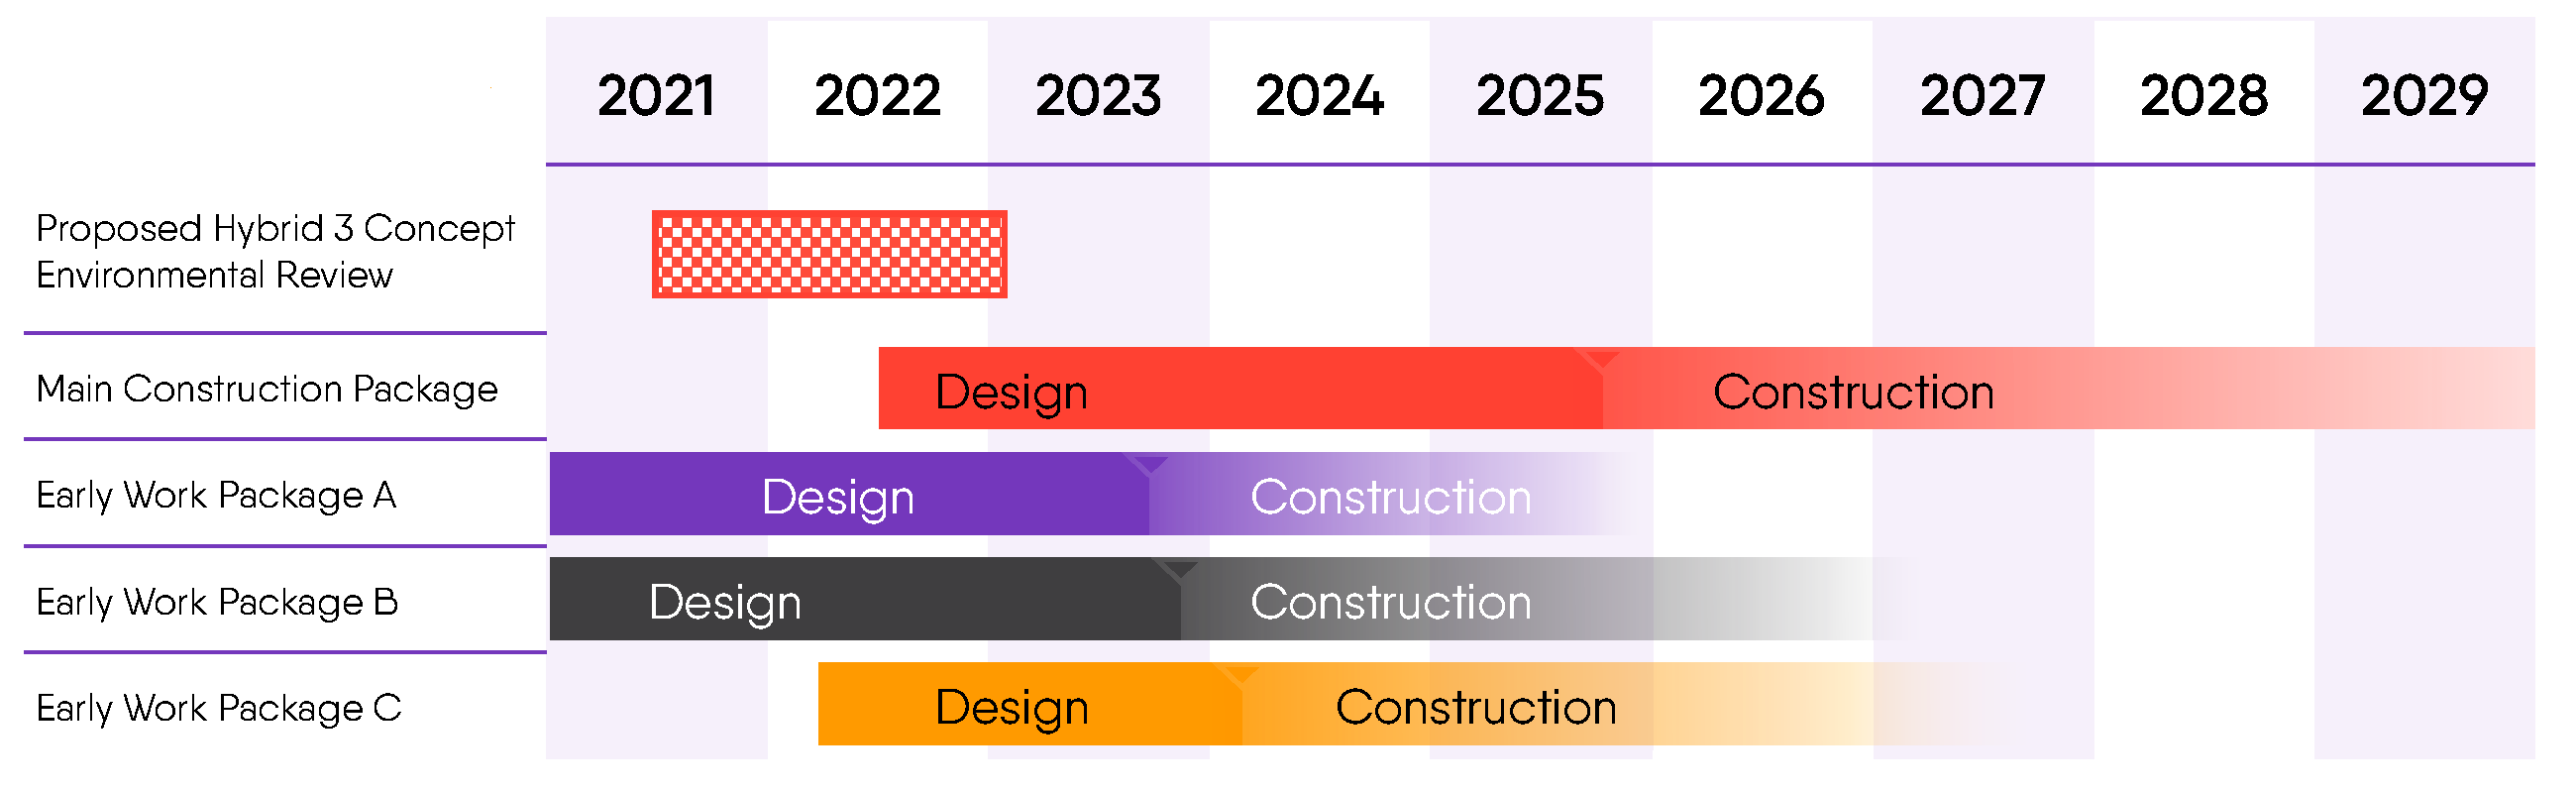 Timeline spanning 2021-2029. Proposed Hybrid 3 Concept Environmental Review 2021-2022; Main Construction Package Design 2022-2205; Main Construction Package Construction 2025-2029; Early Work Package A Design 2021-2023; Work Package A Construction 2023-2026; Early Work Package B Design 2021-2023; Work Package B Construction 2023-2026; Early Work Package C Design 2022-2024; Work Package C Construction 2024-2026;